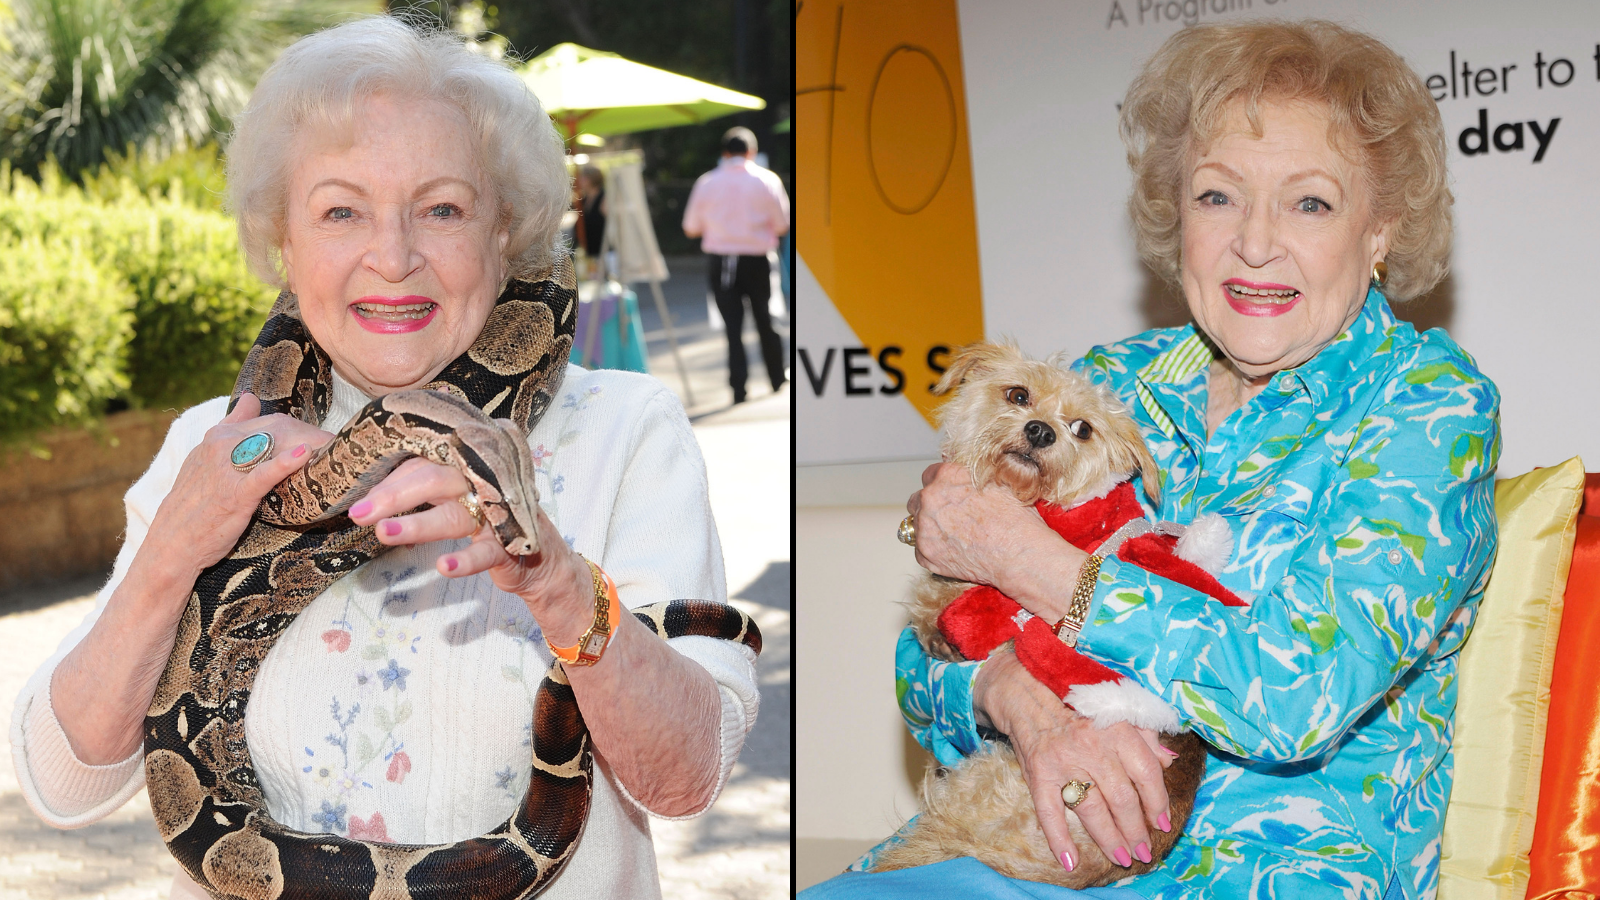 The 'Betty White Challenge' Encourages Fans To Donate $5 To A Local Animal Shelter In Her Honor